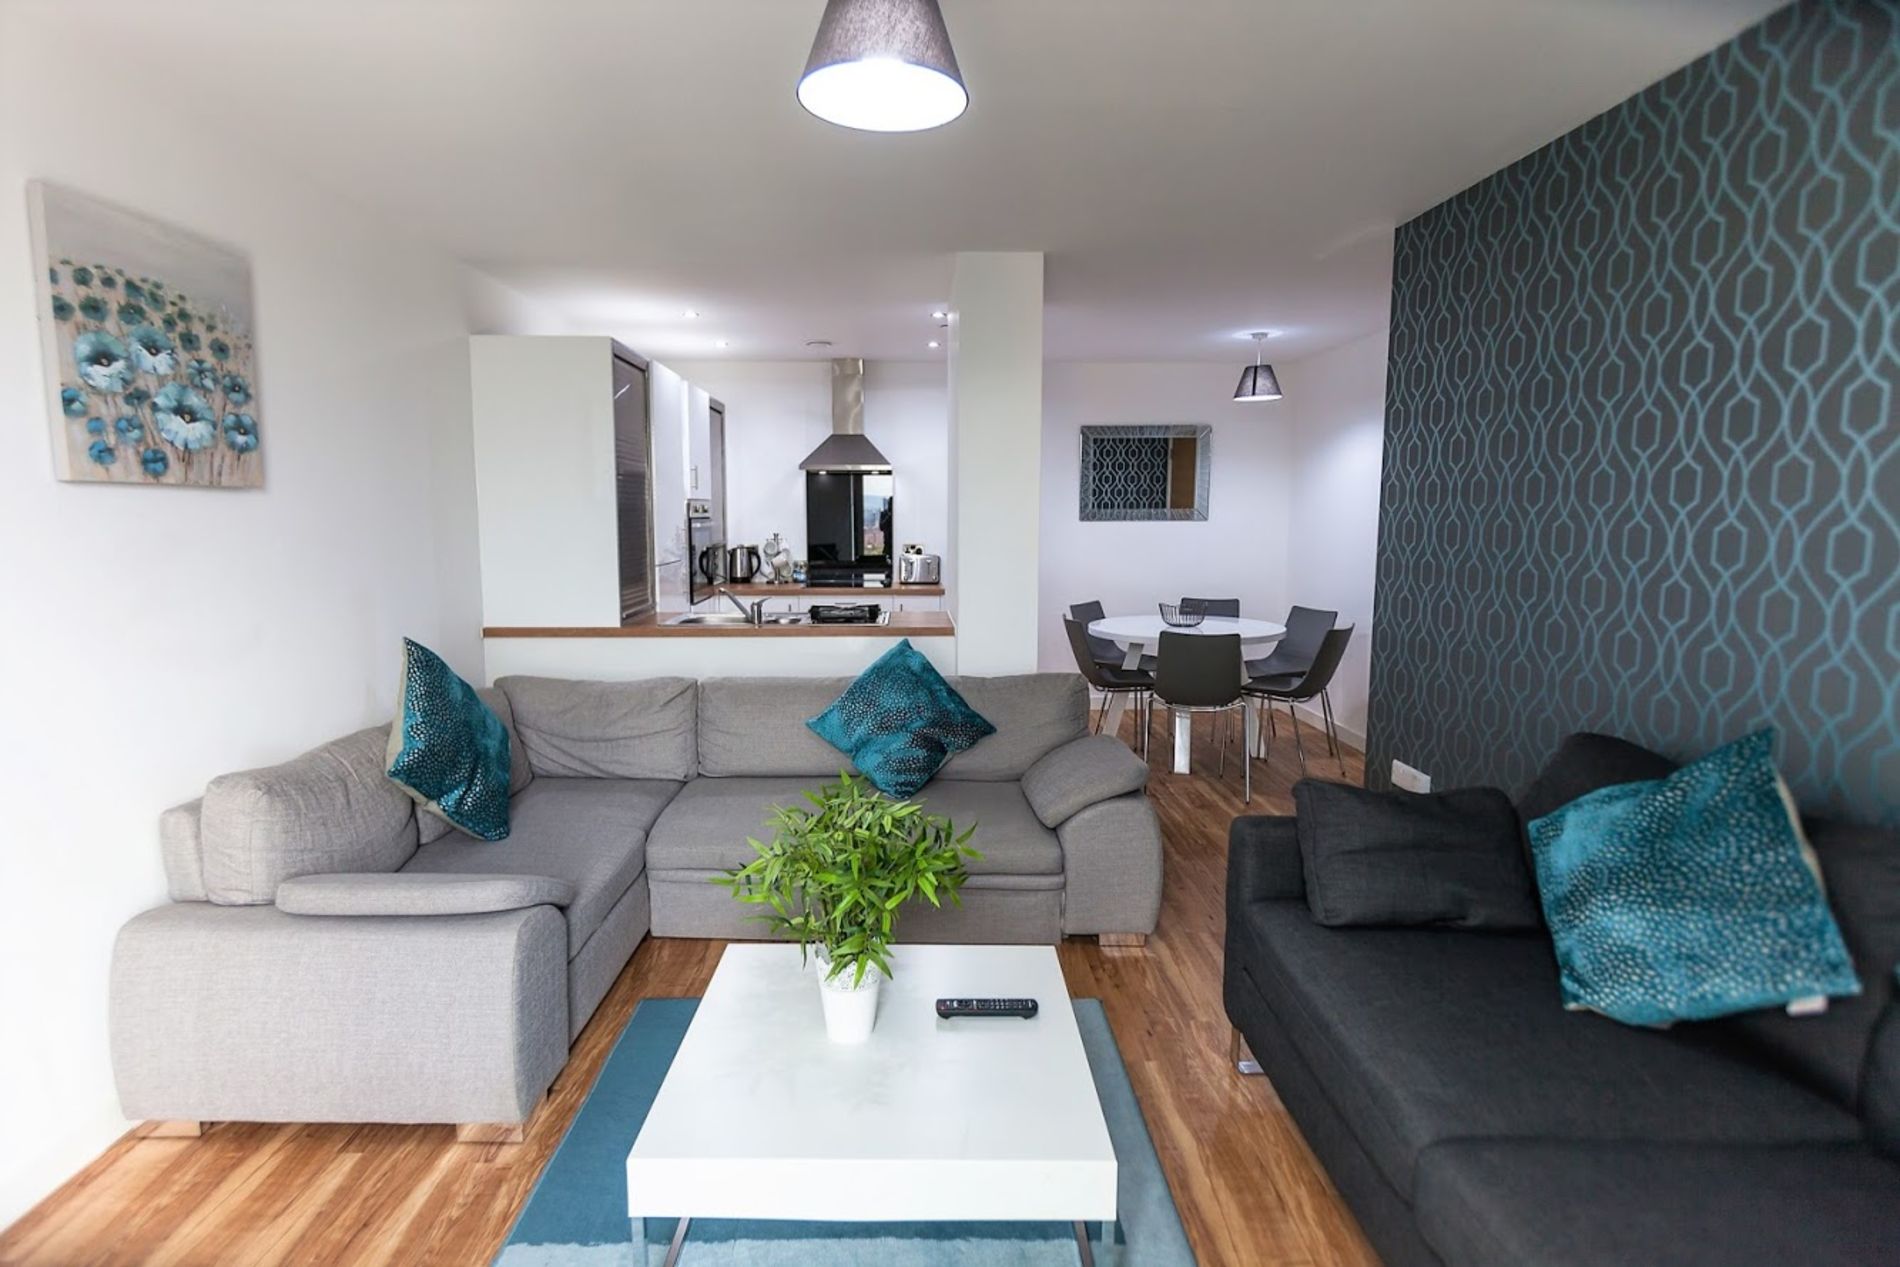 Family-friendly self catering apartment in Media City, Manchester